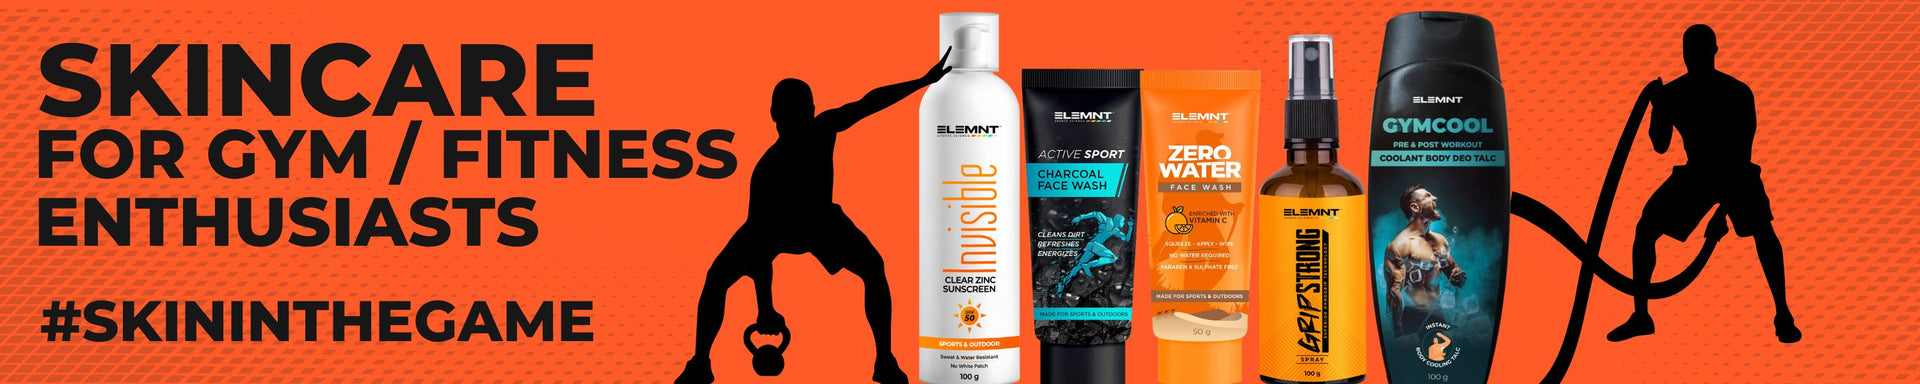 skincare for gym and fitness enthusiasts